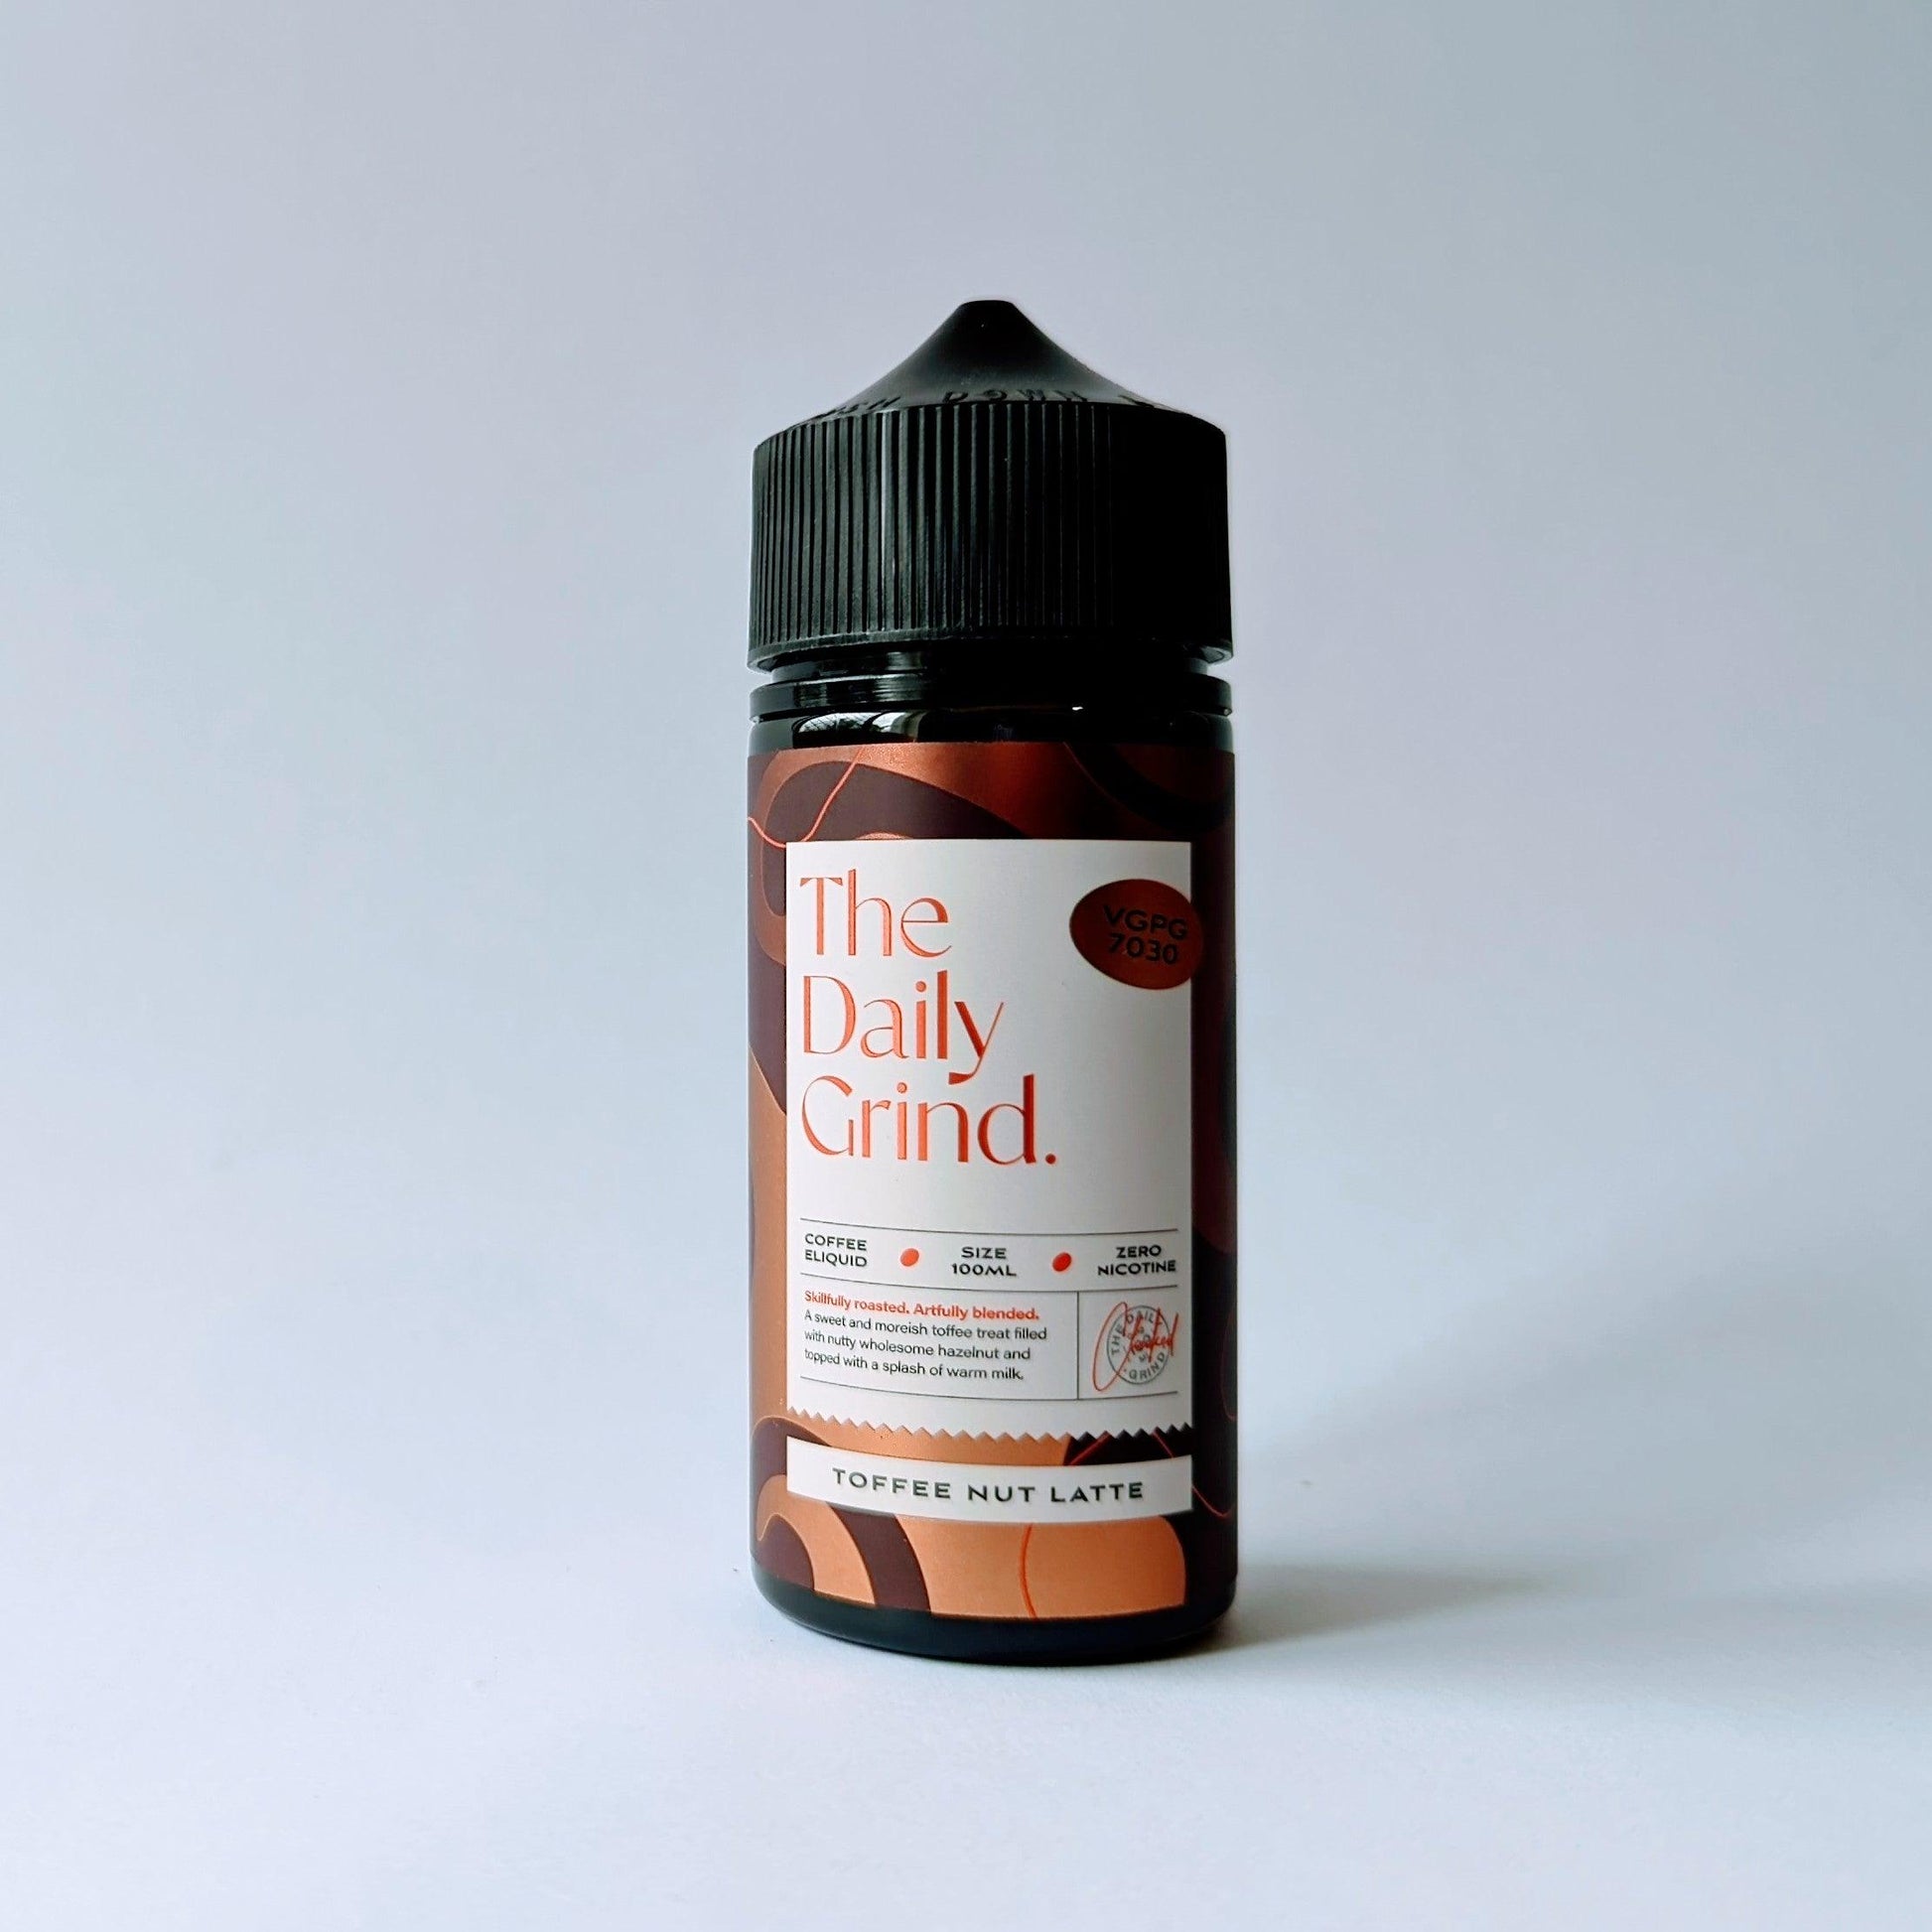 The Daily Grind Toffee Nut Latte Vape Juice